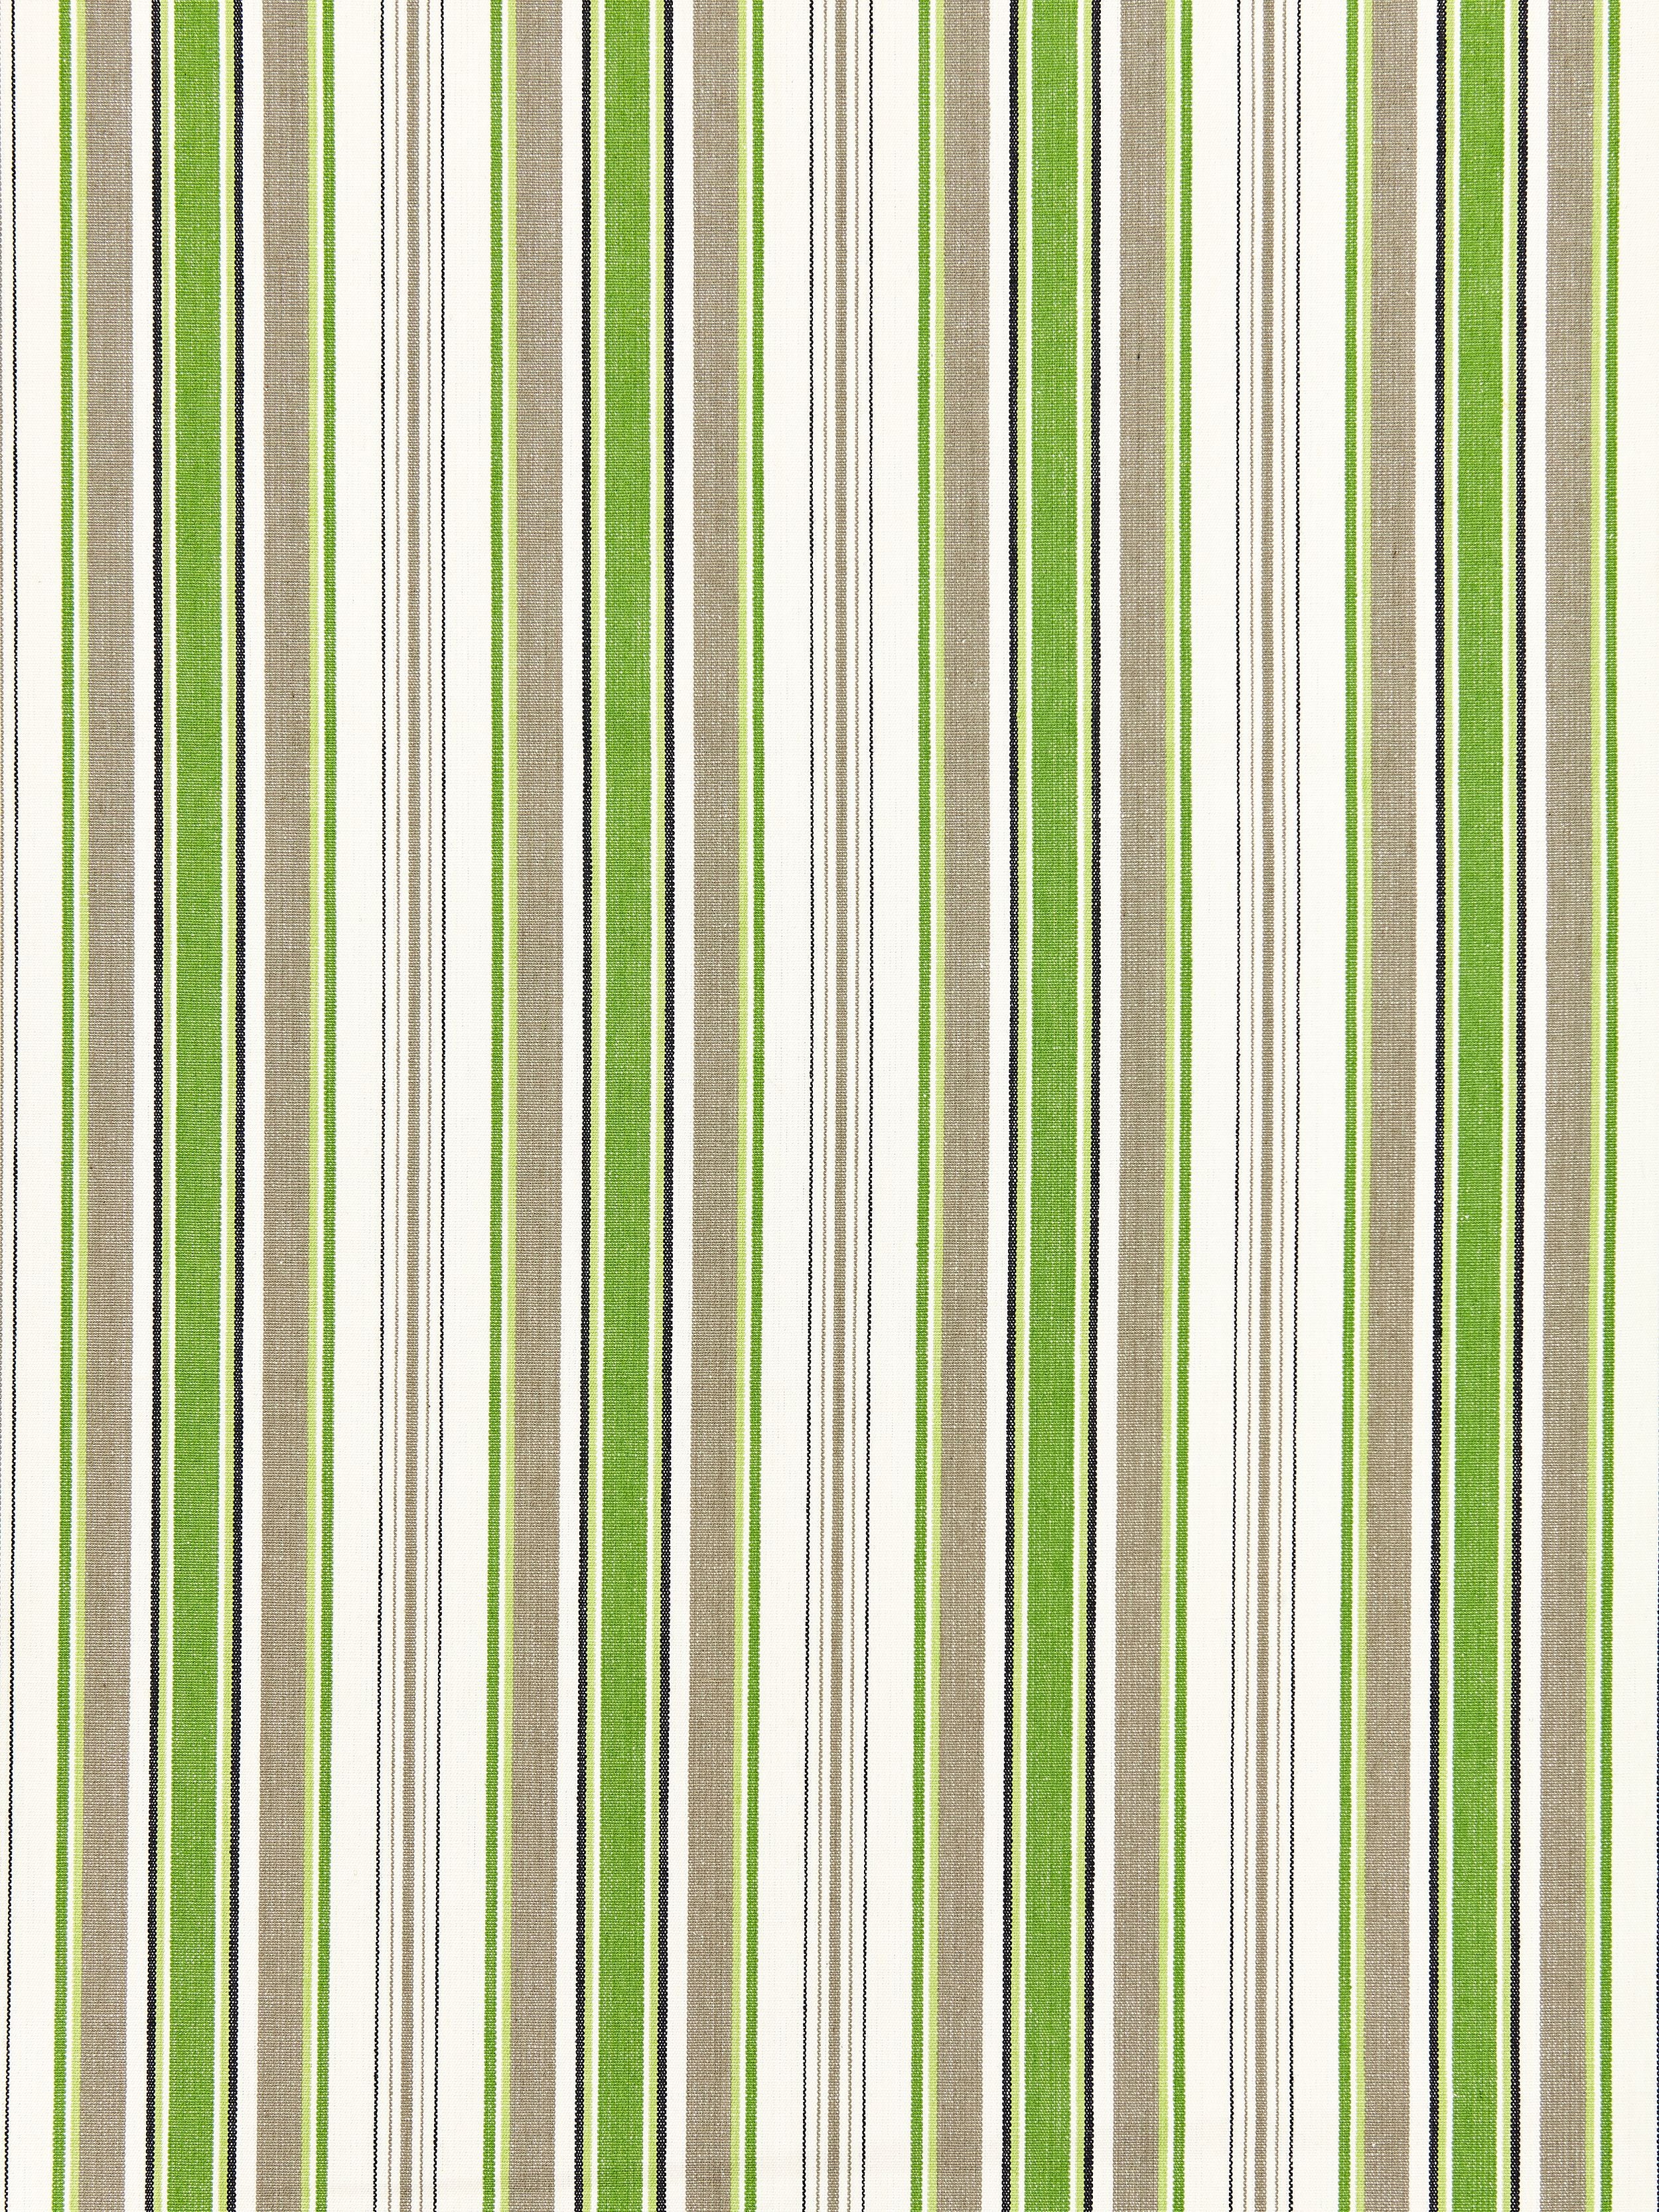 Andover Cotton Stripe fabric in green tea color - pattern number SC 000327113 - by Scalamandre in the Scalamandre Fabrics Book 1 collection